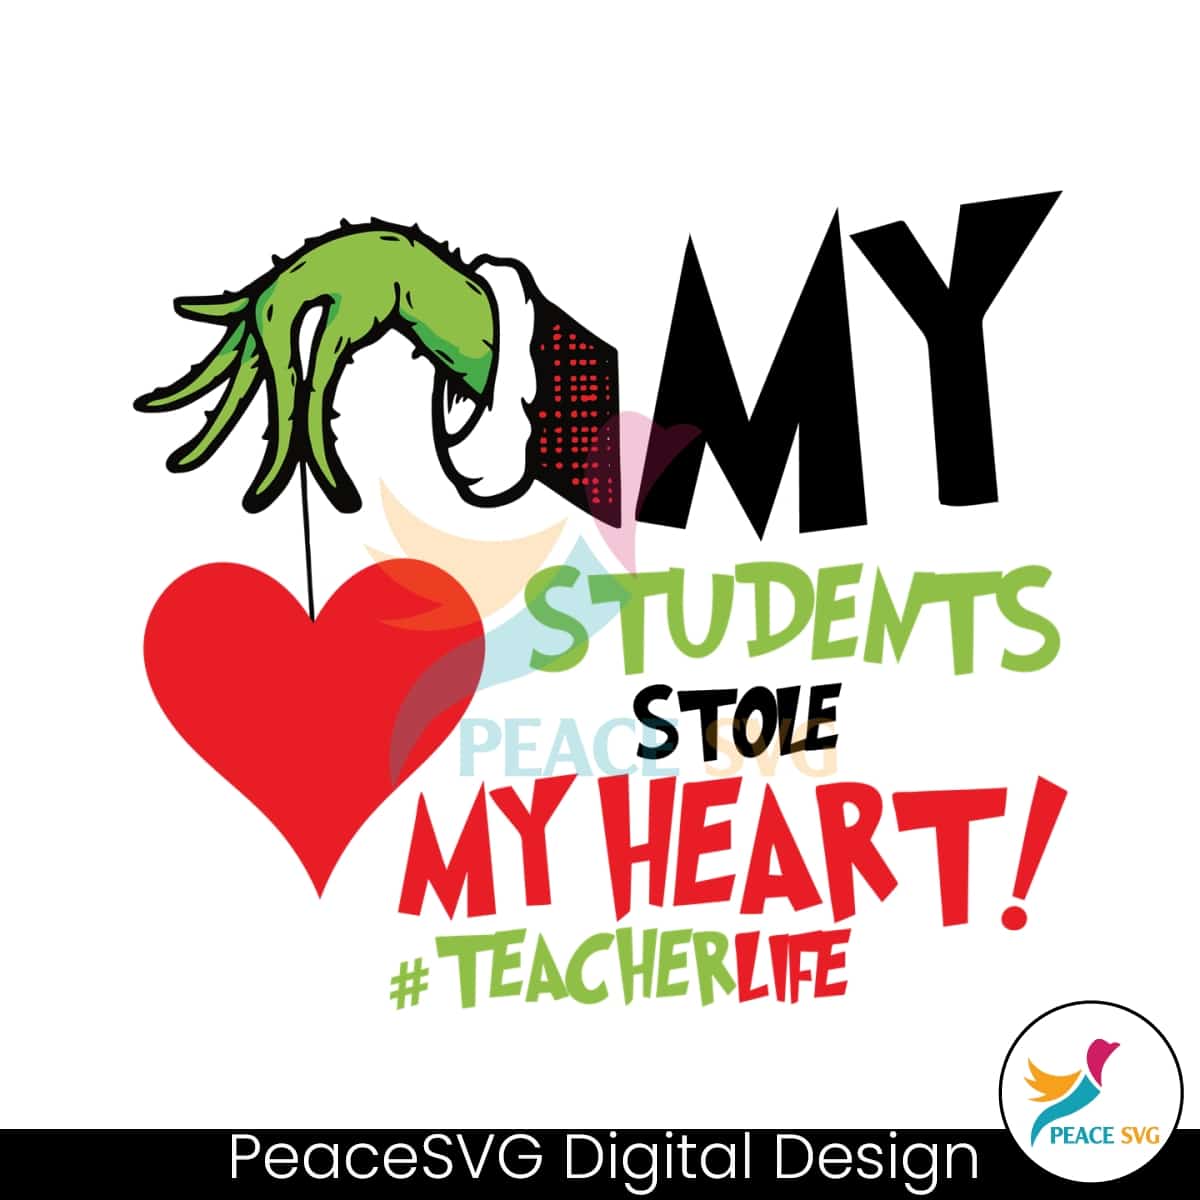 Students Stole My Heart SVG » PeaceSVG